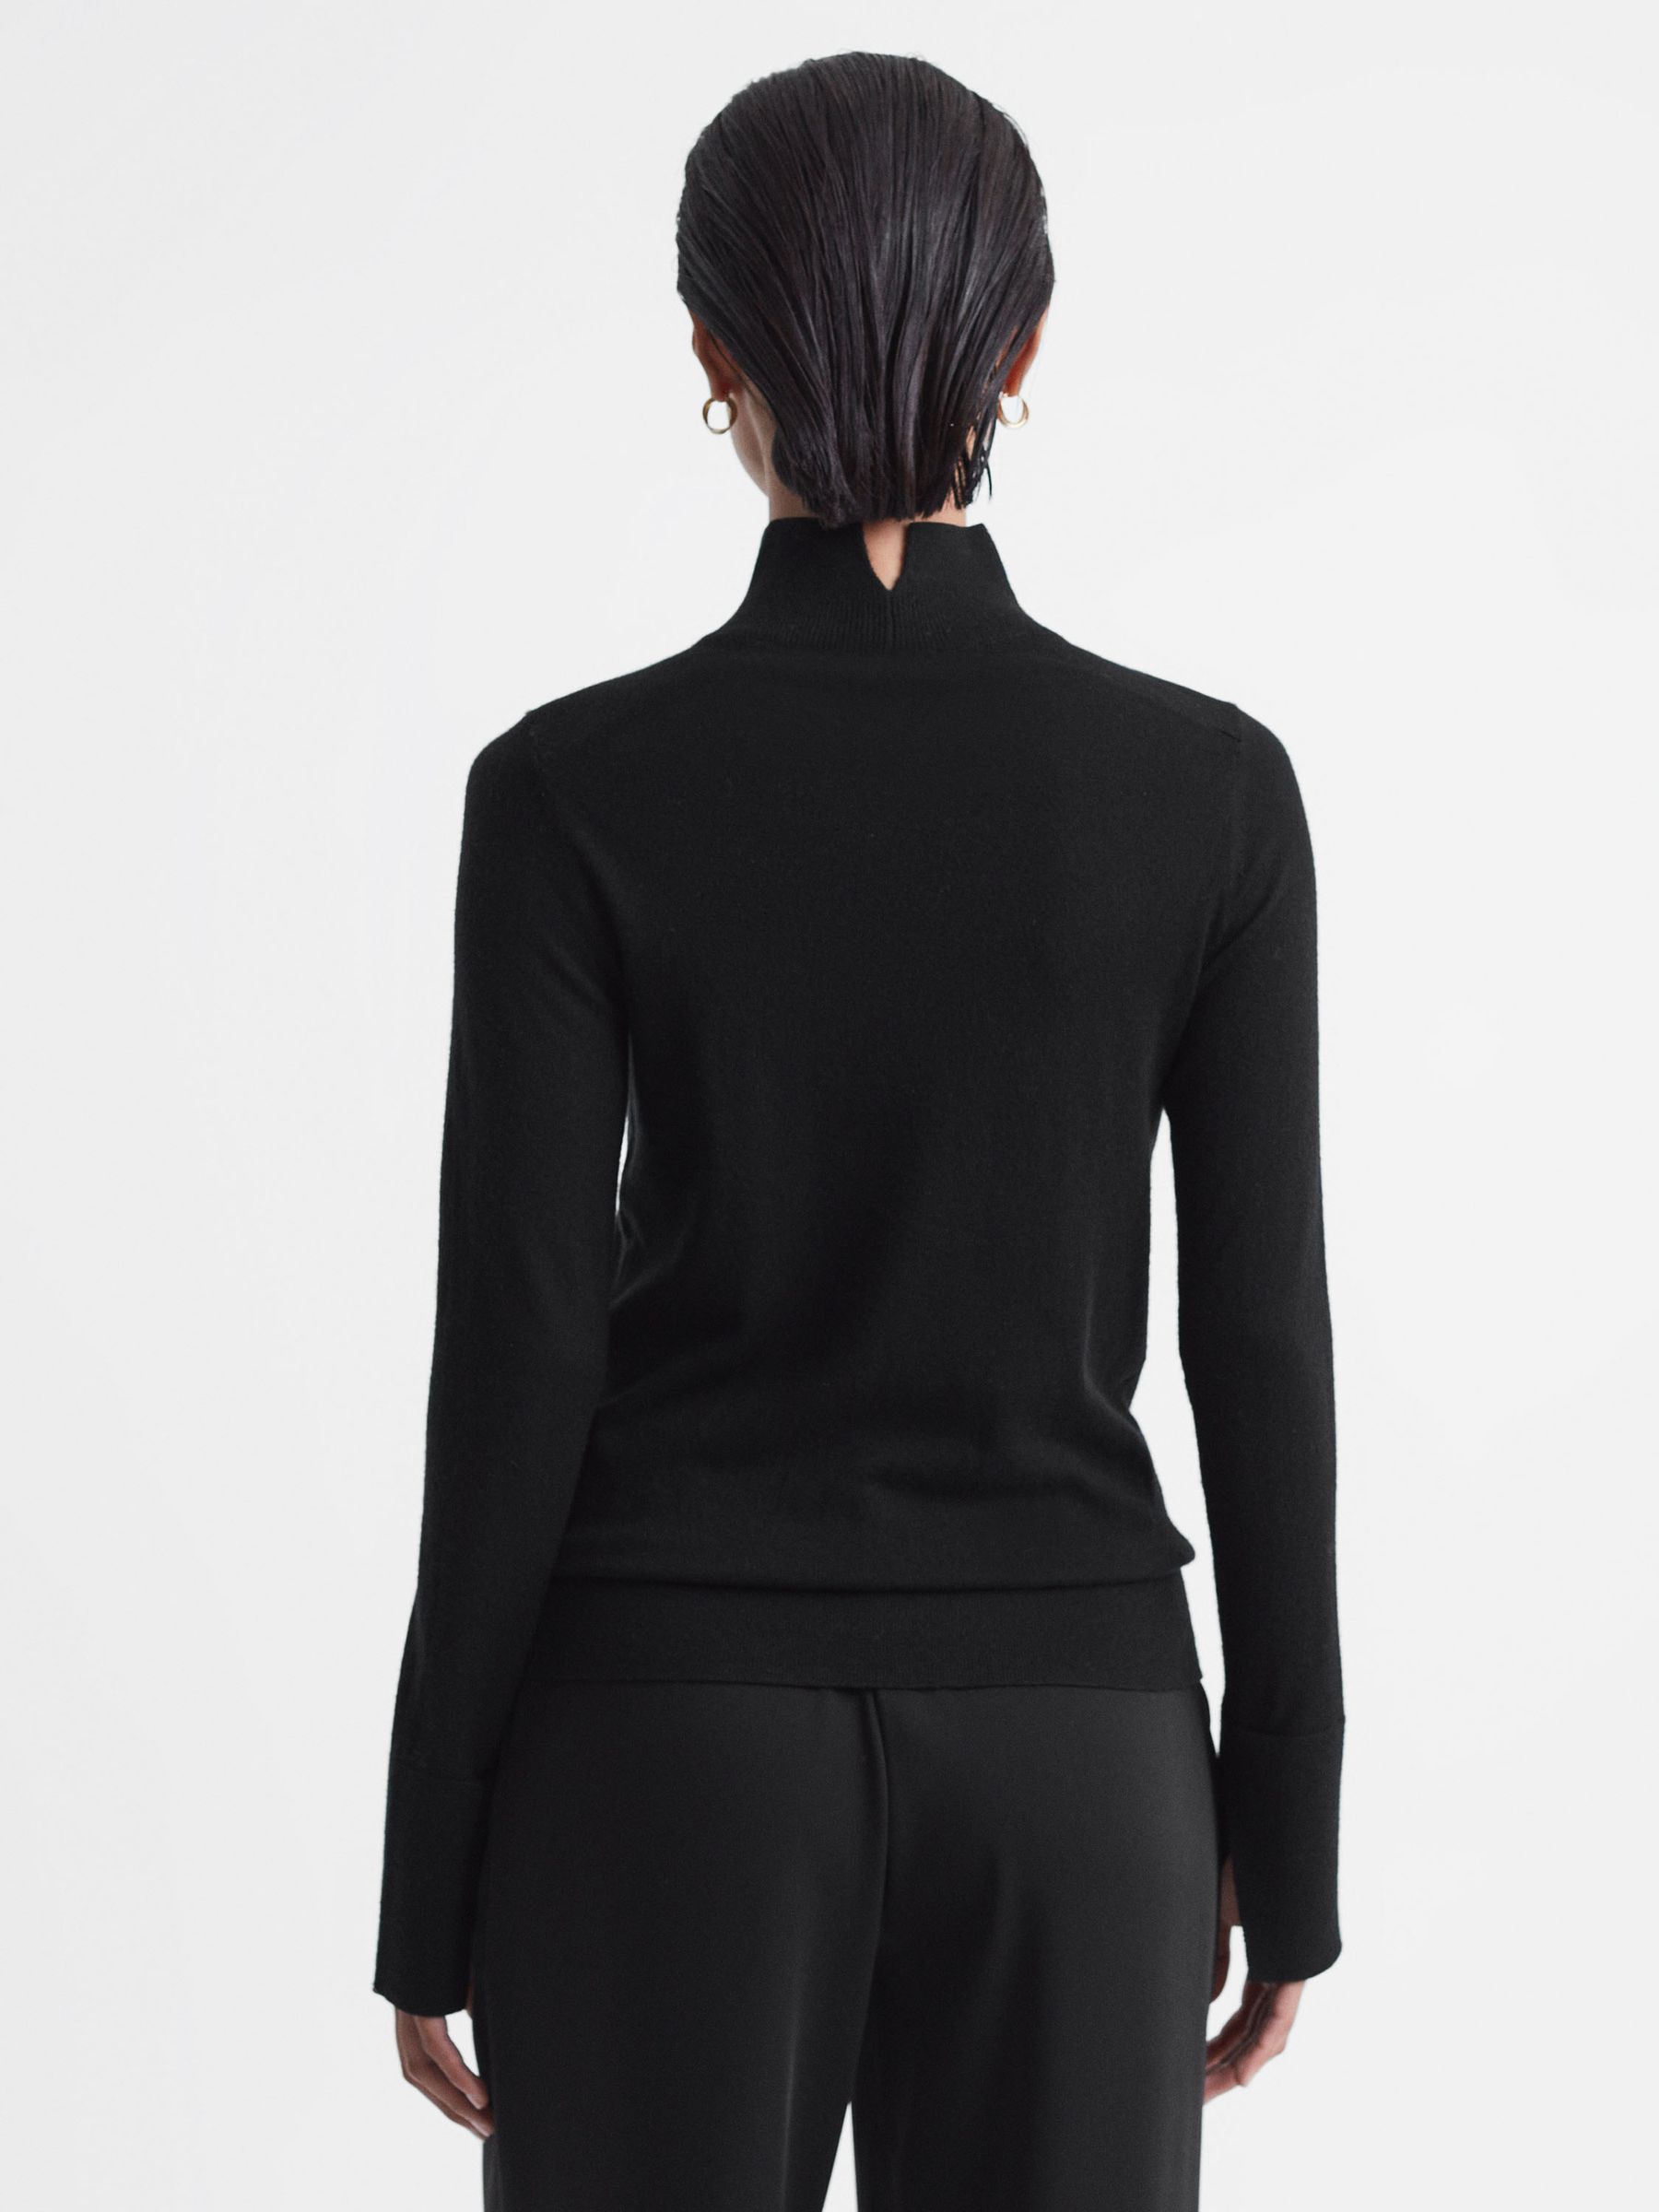 Reiss Kylie Merino Wool Fitted Funnel Neck Top - REISS